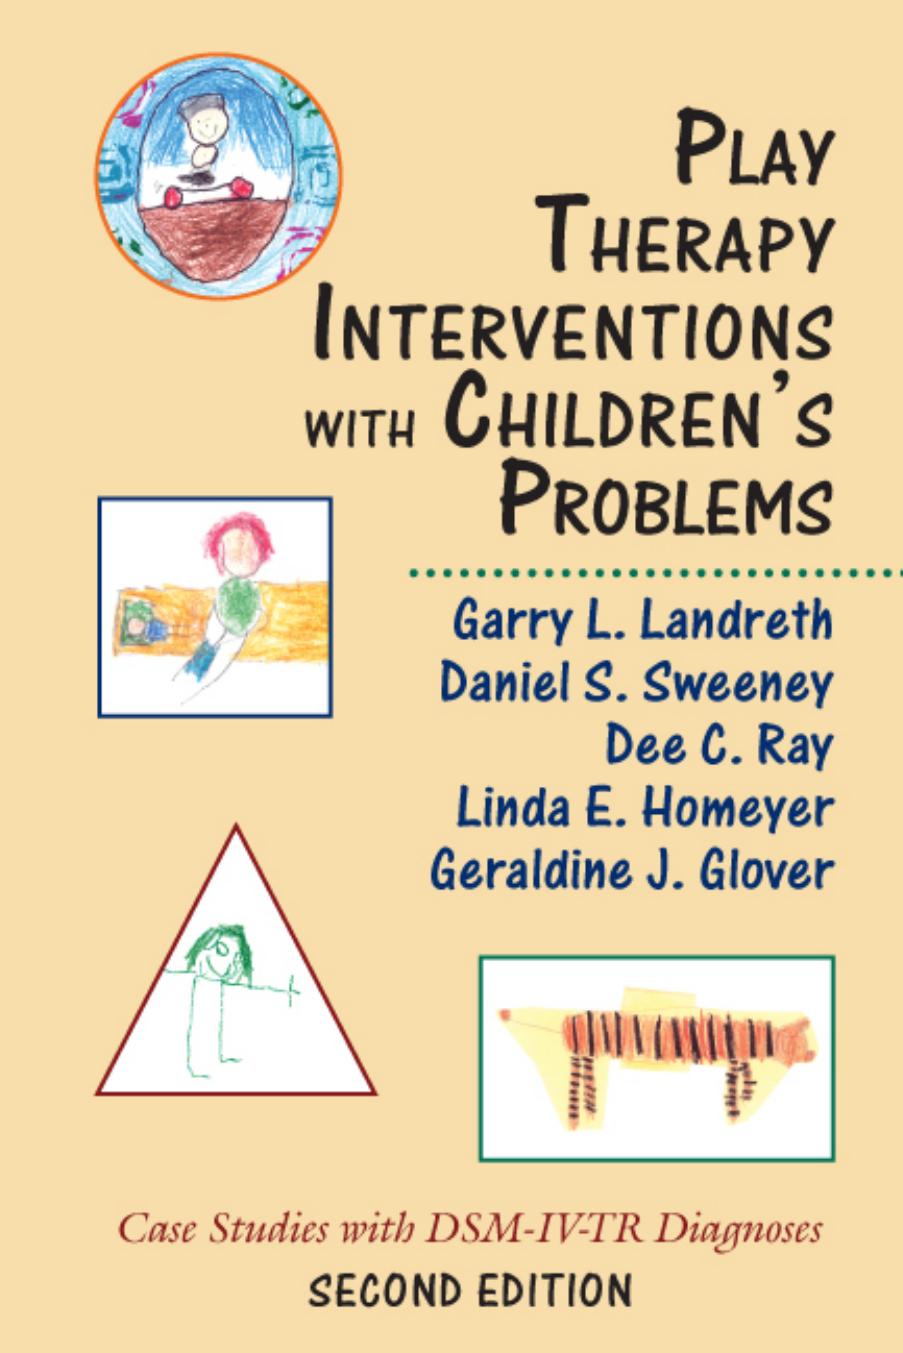 Play Therapy Interventions with Children's Problems : Case Studies with DSM-IV-TR Diagnoses by unknow